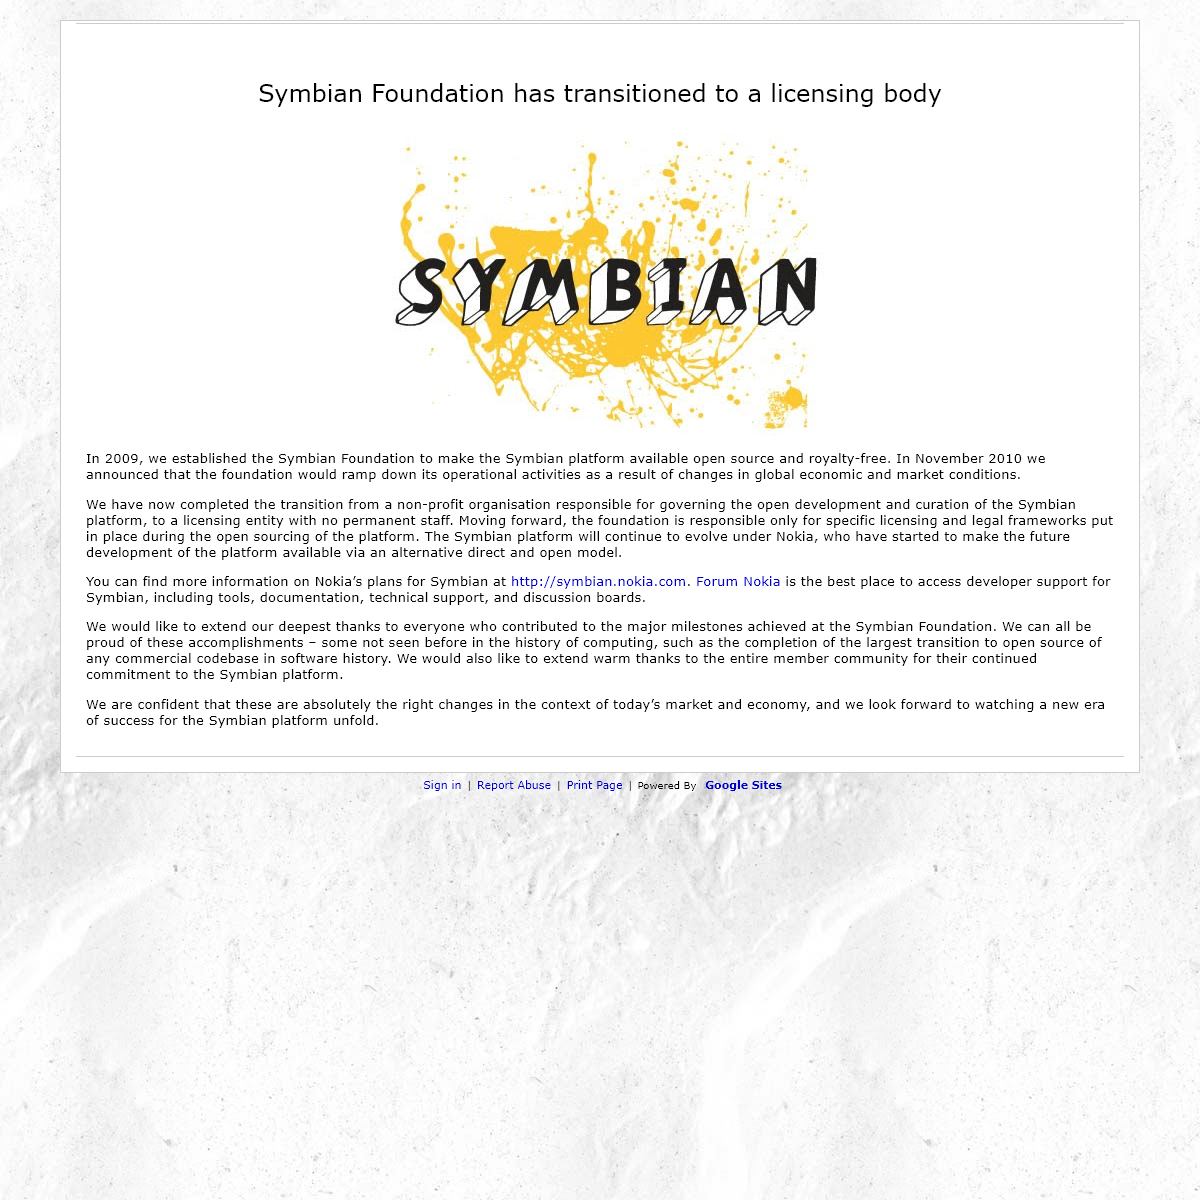 A complete backup of symbian.org